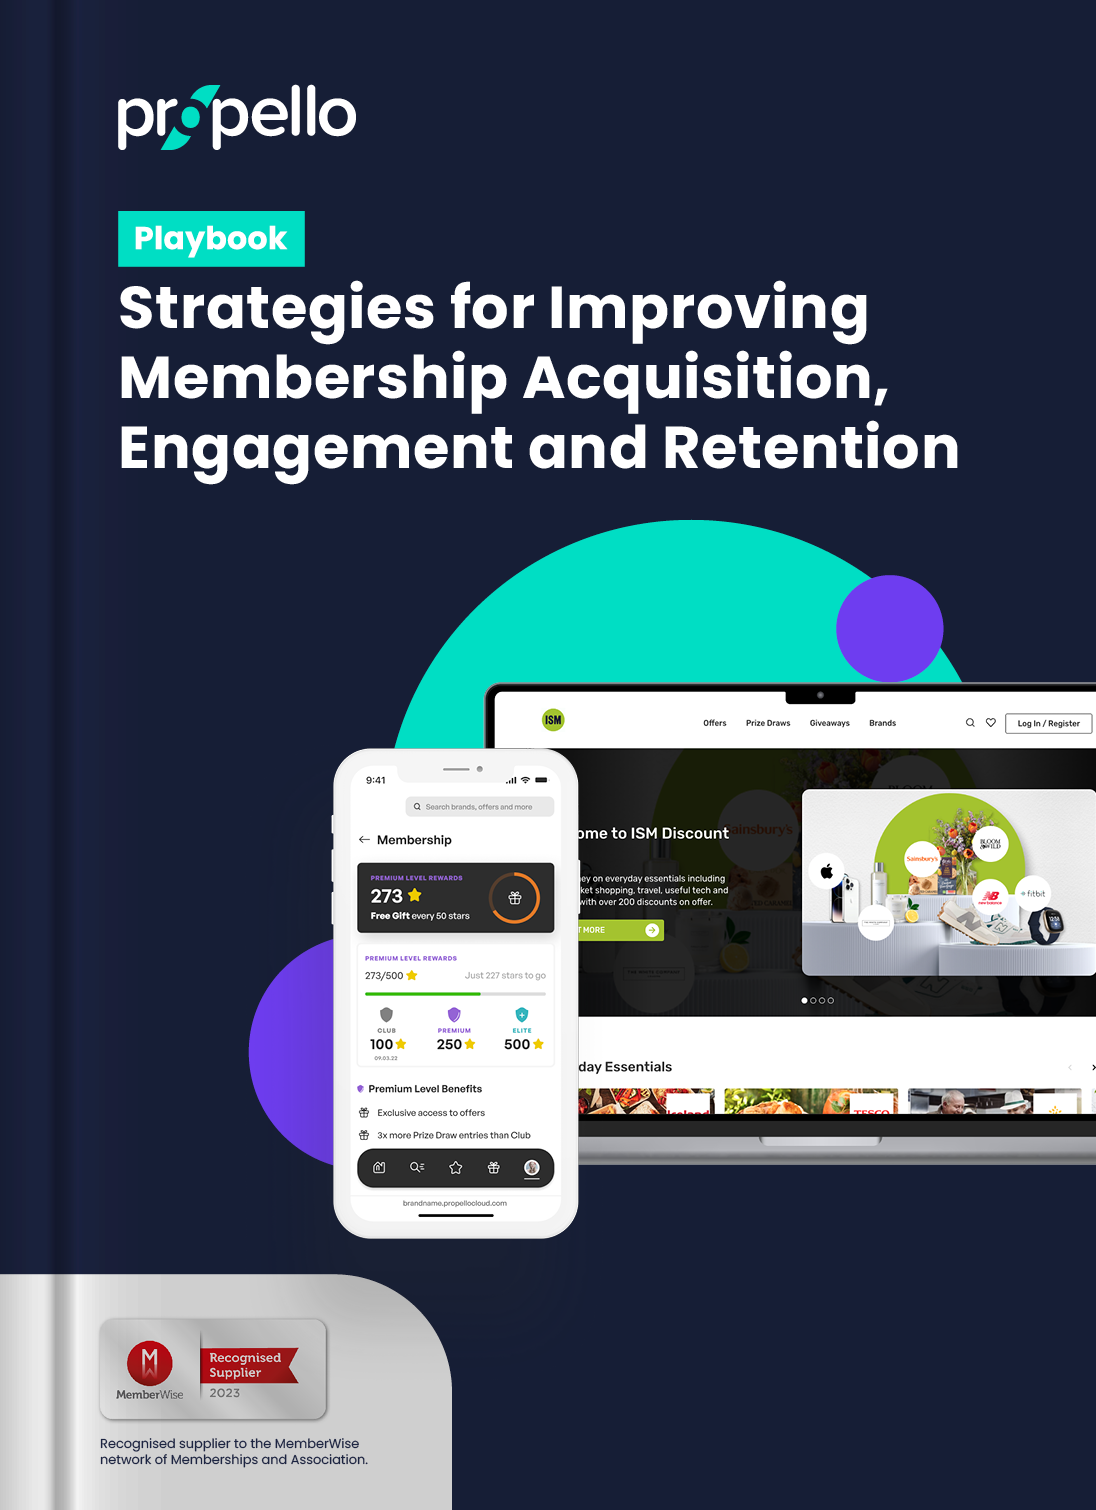 Strategies for Improving Membership Acquisition, Engagement and Retention